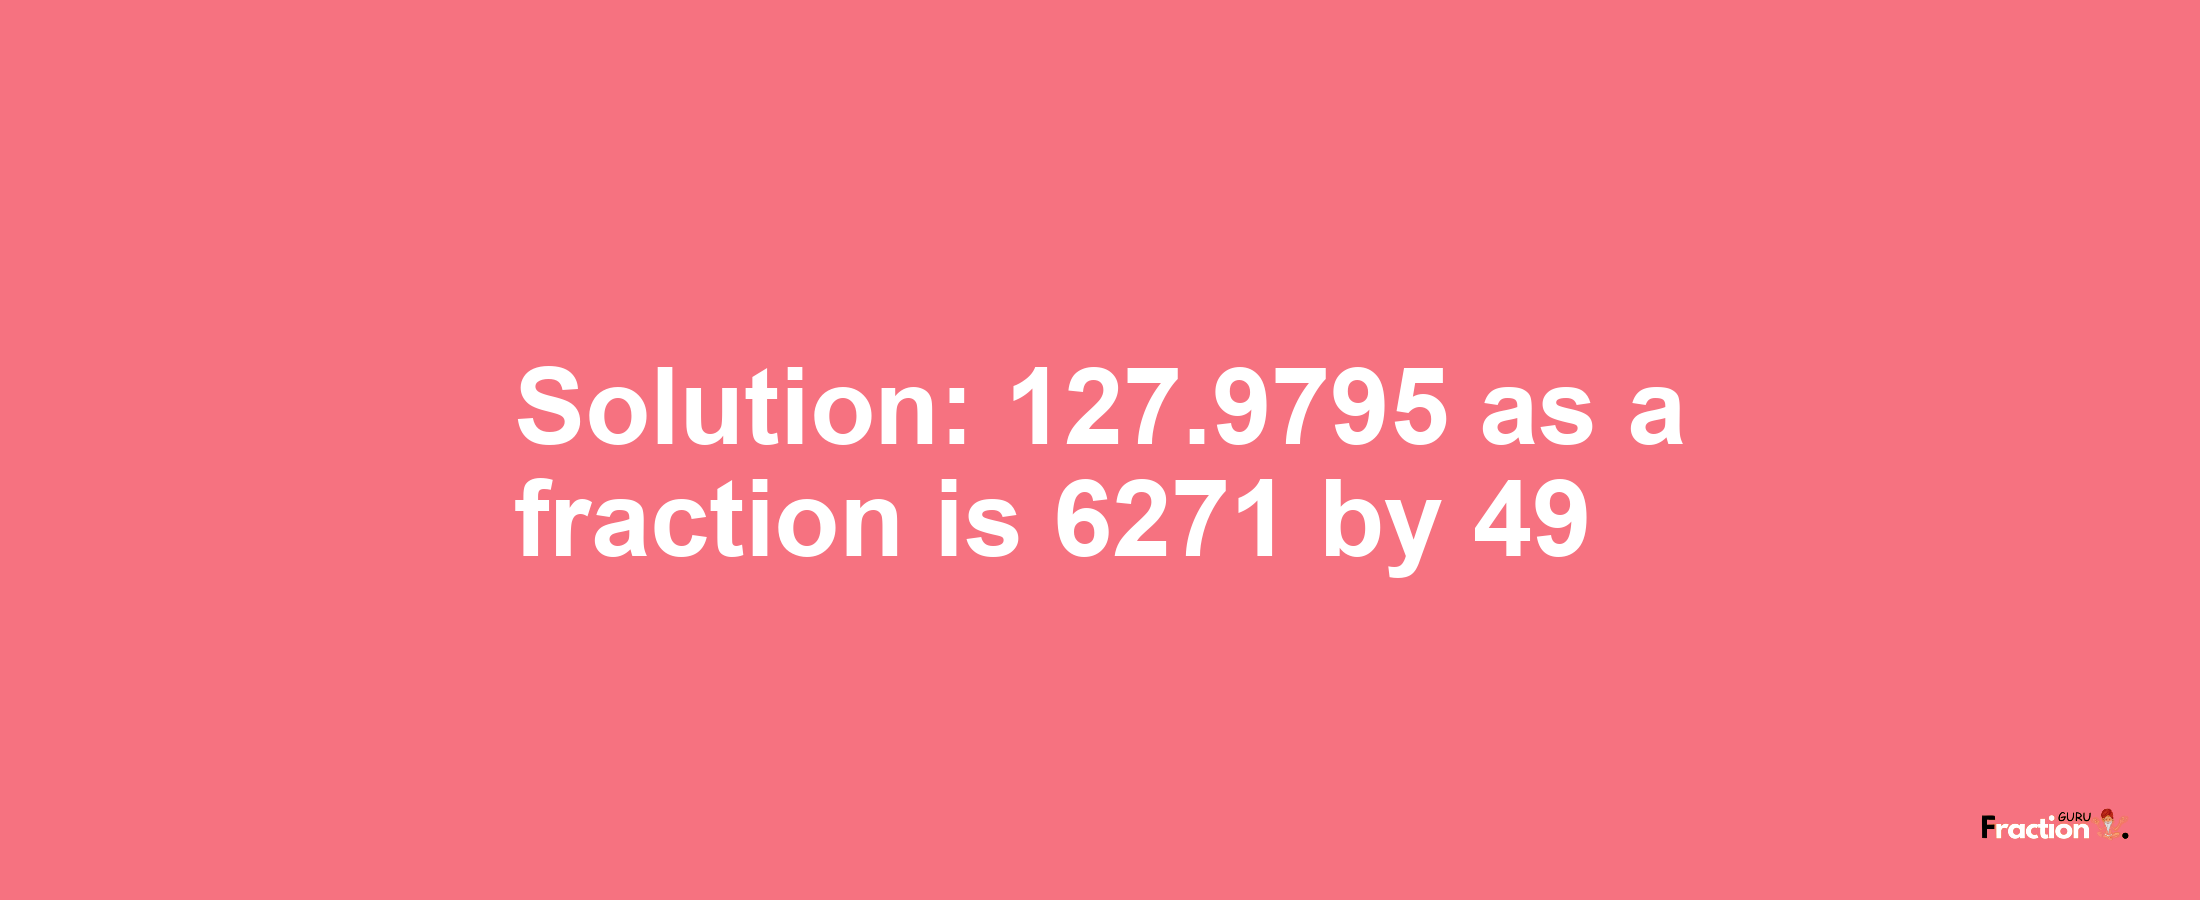 Solution:127.9795 as a fraction is 6271/49